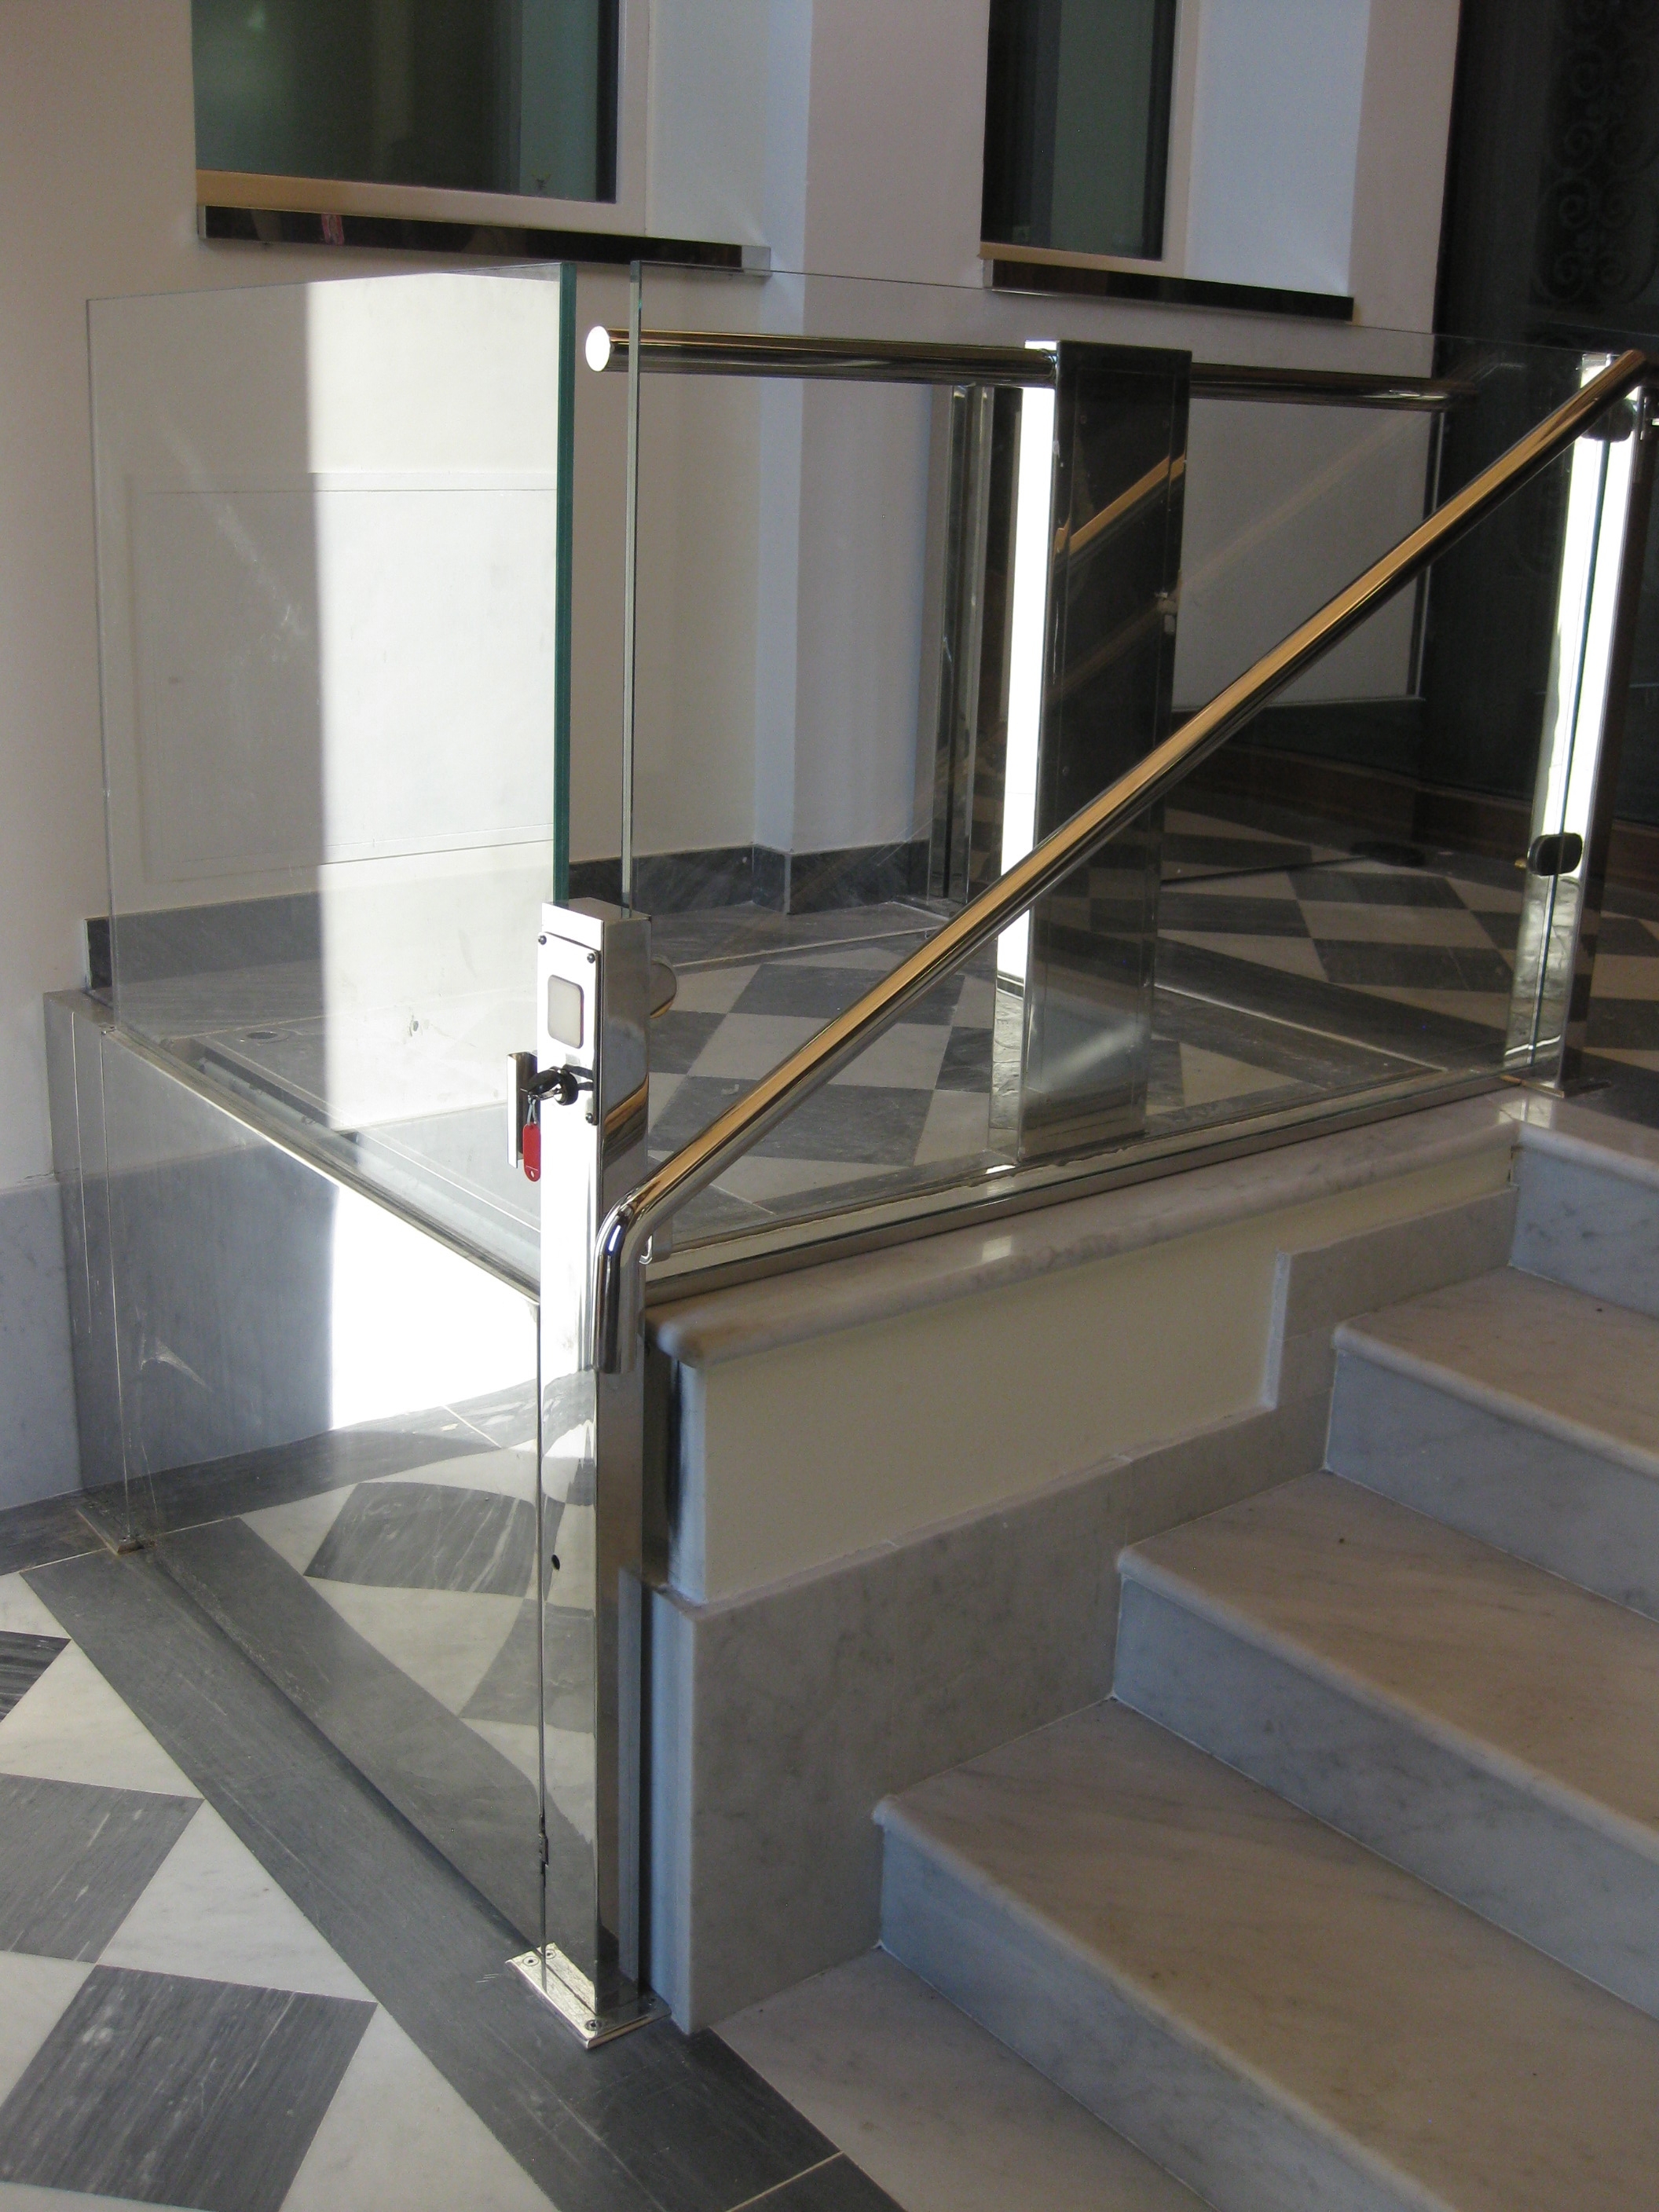 Accessible Route - Lift Main Lobby